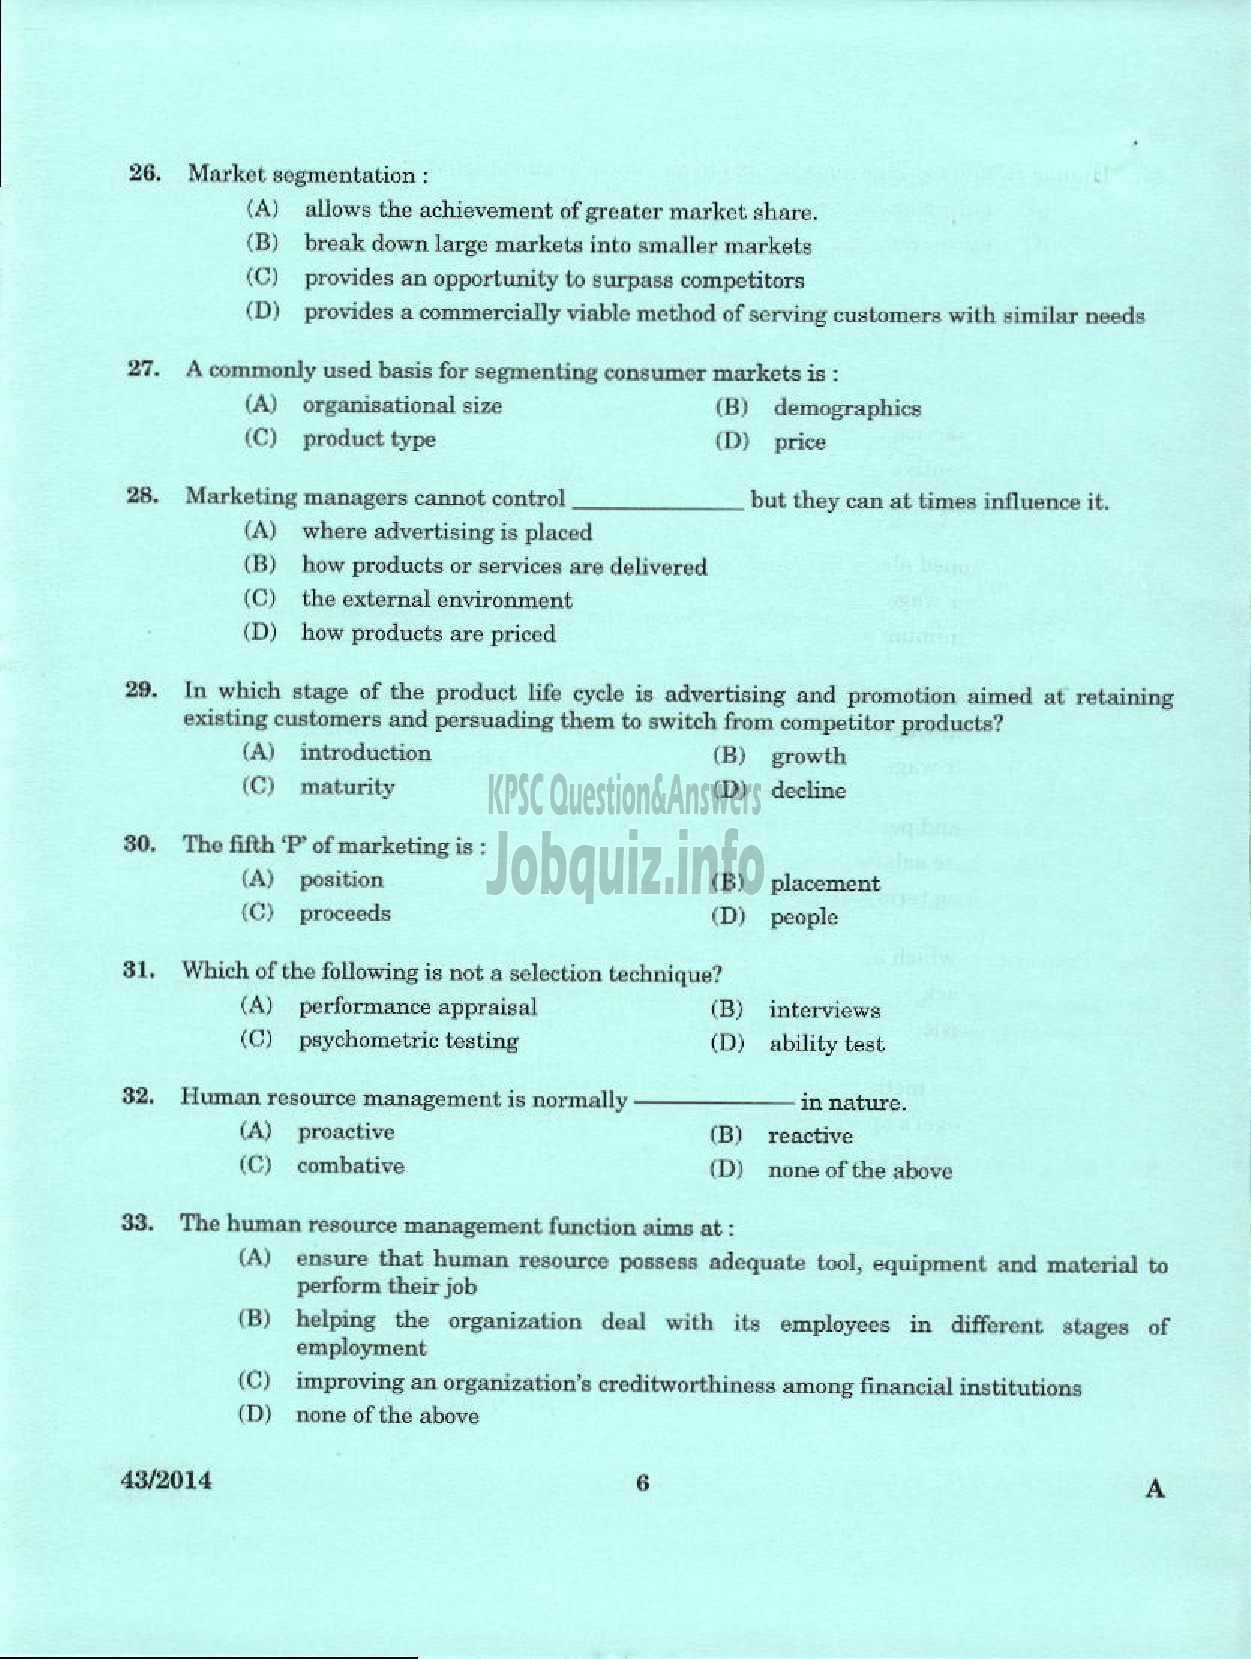 Kerala PSC Question Paper - DEPUTY GENERAL MANAGER DCB IDKY AND KSGD PART I AND PART II-4